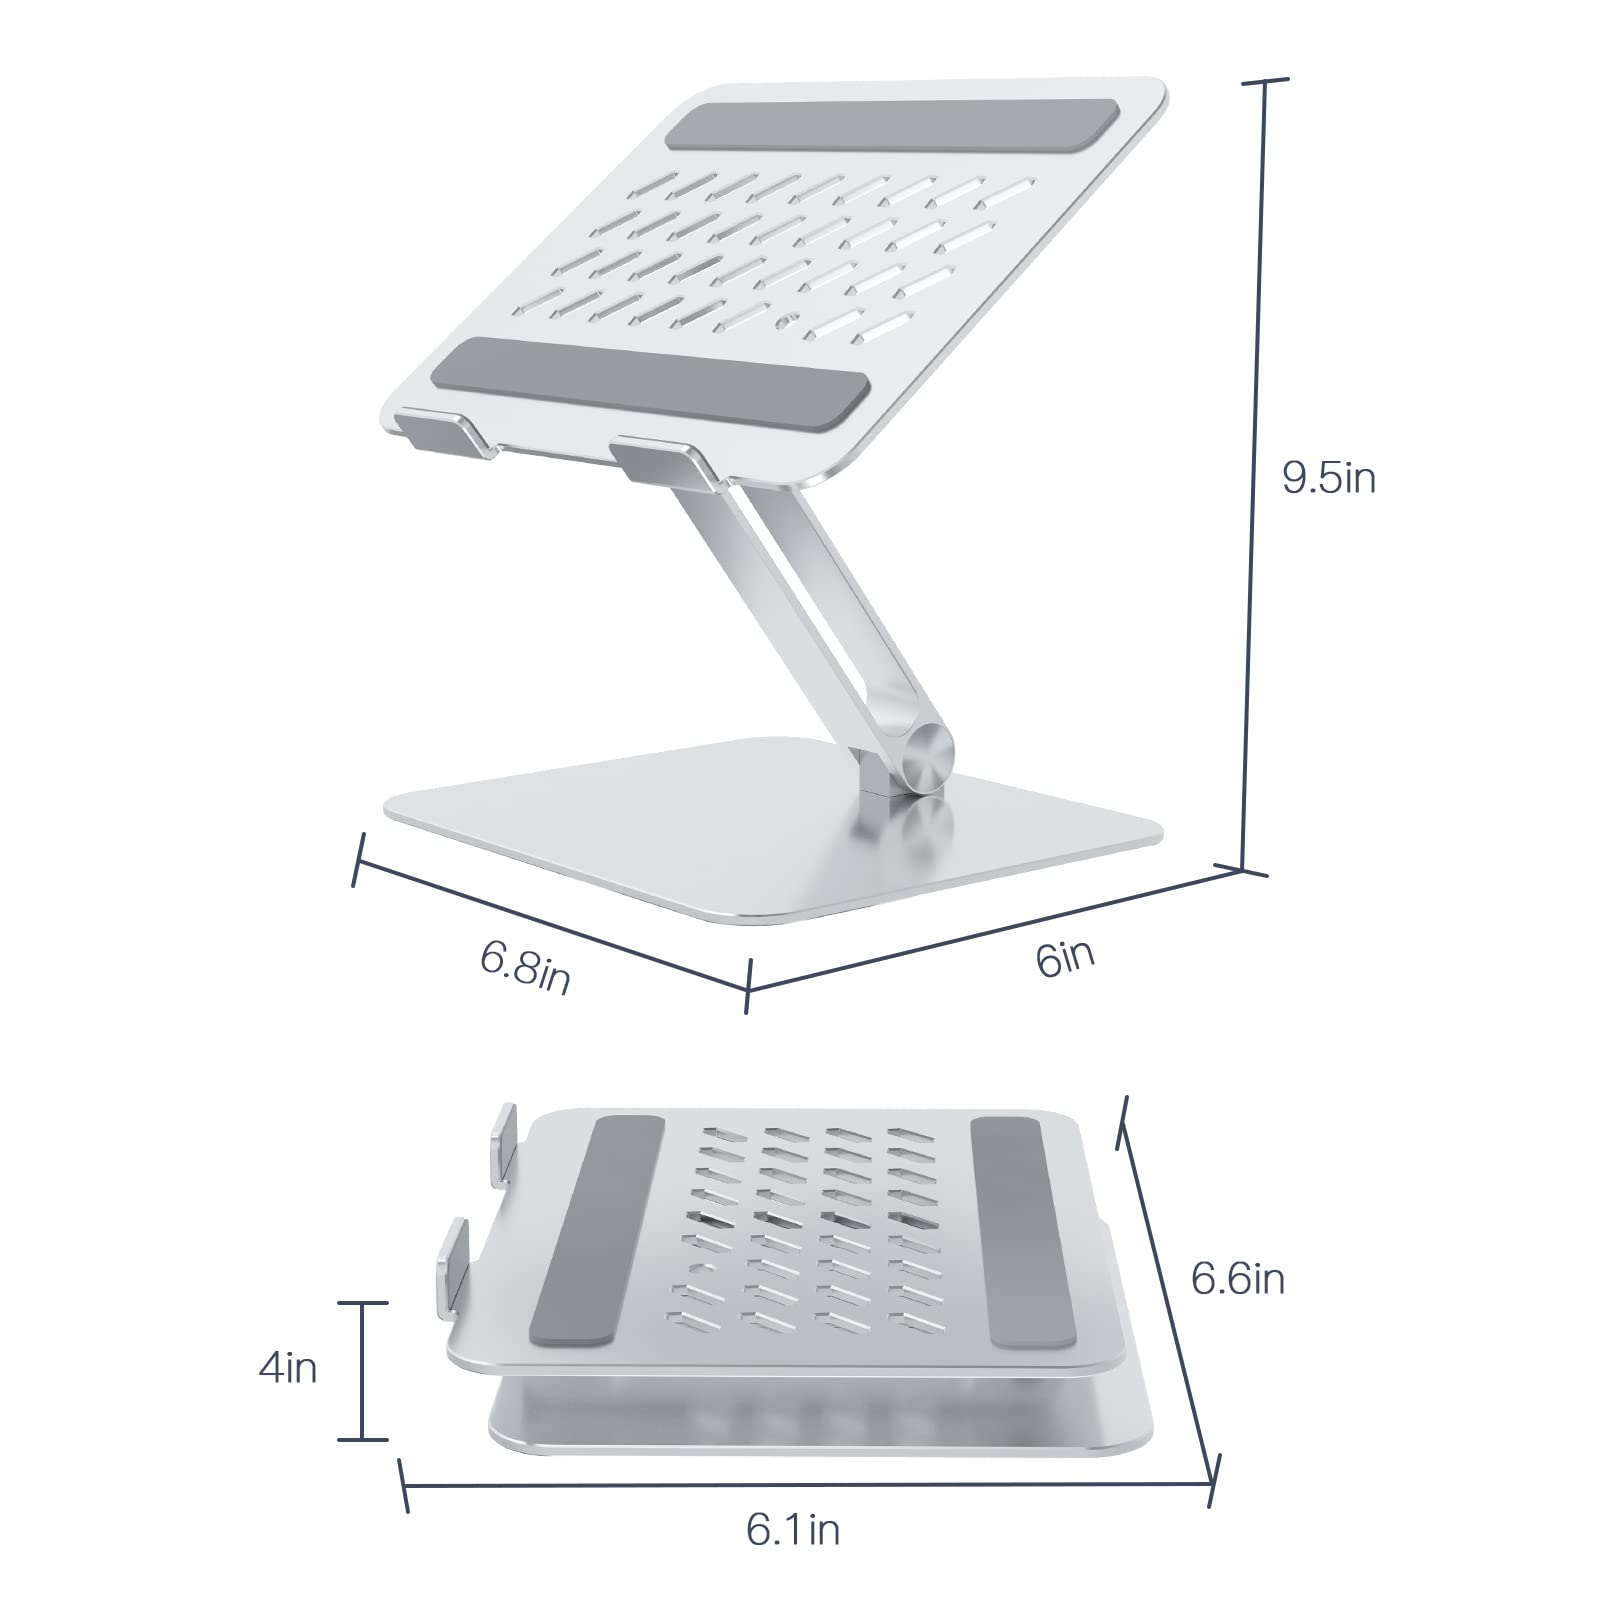 Laptop Stand for Desk, Laptop Stand, Computer Stand, Foldable Height Adjustable Ventilated Aluminium Portable Laptop Stand, for Men Working from Home Tech Gifts, Fits for All 10-17.3" Thin Laptops